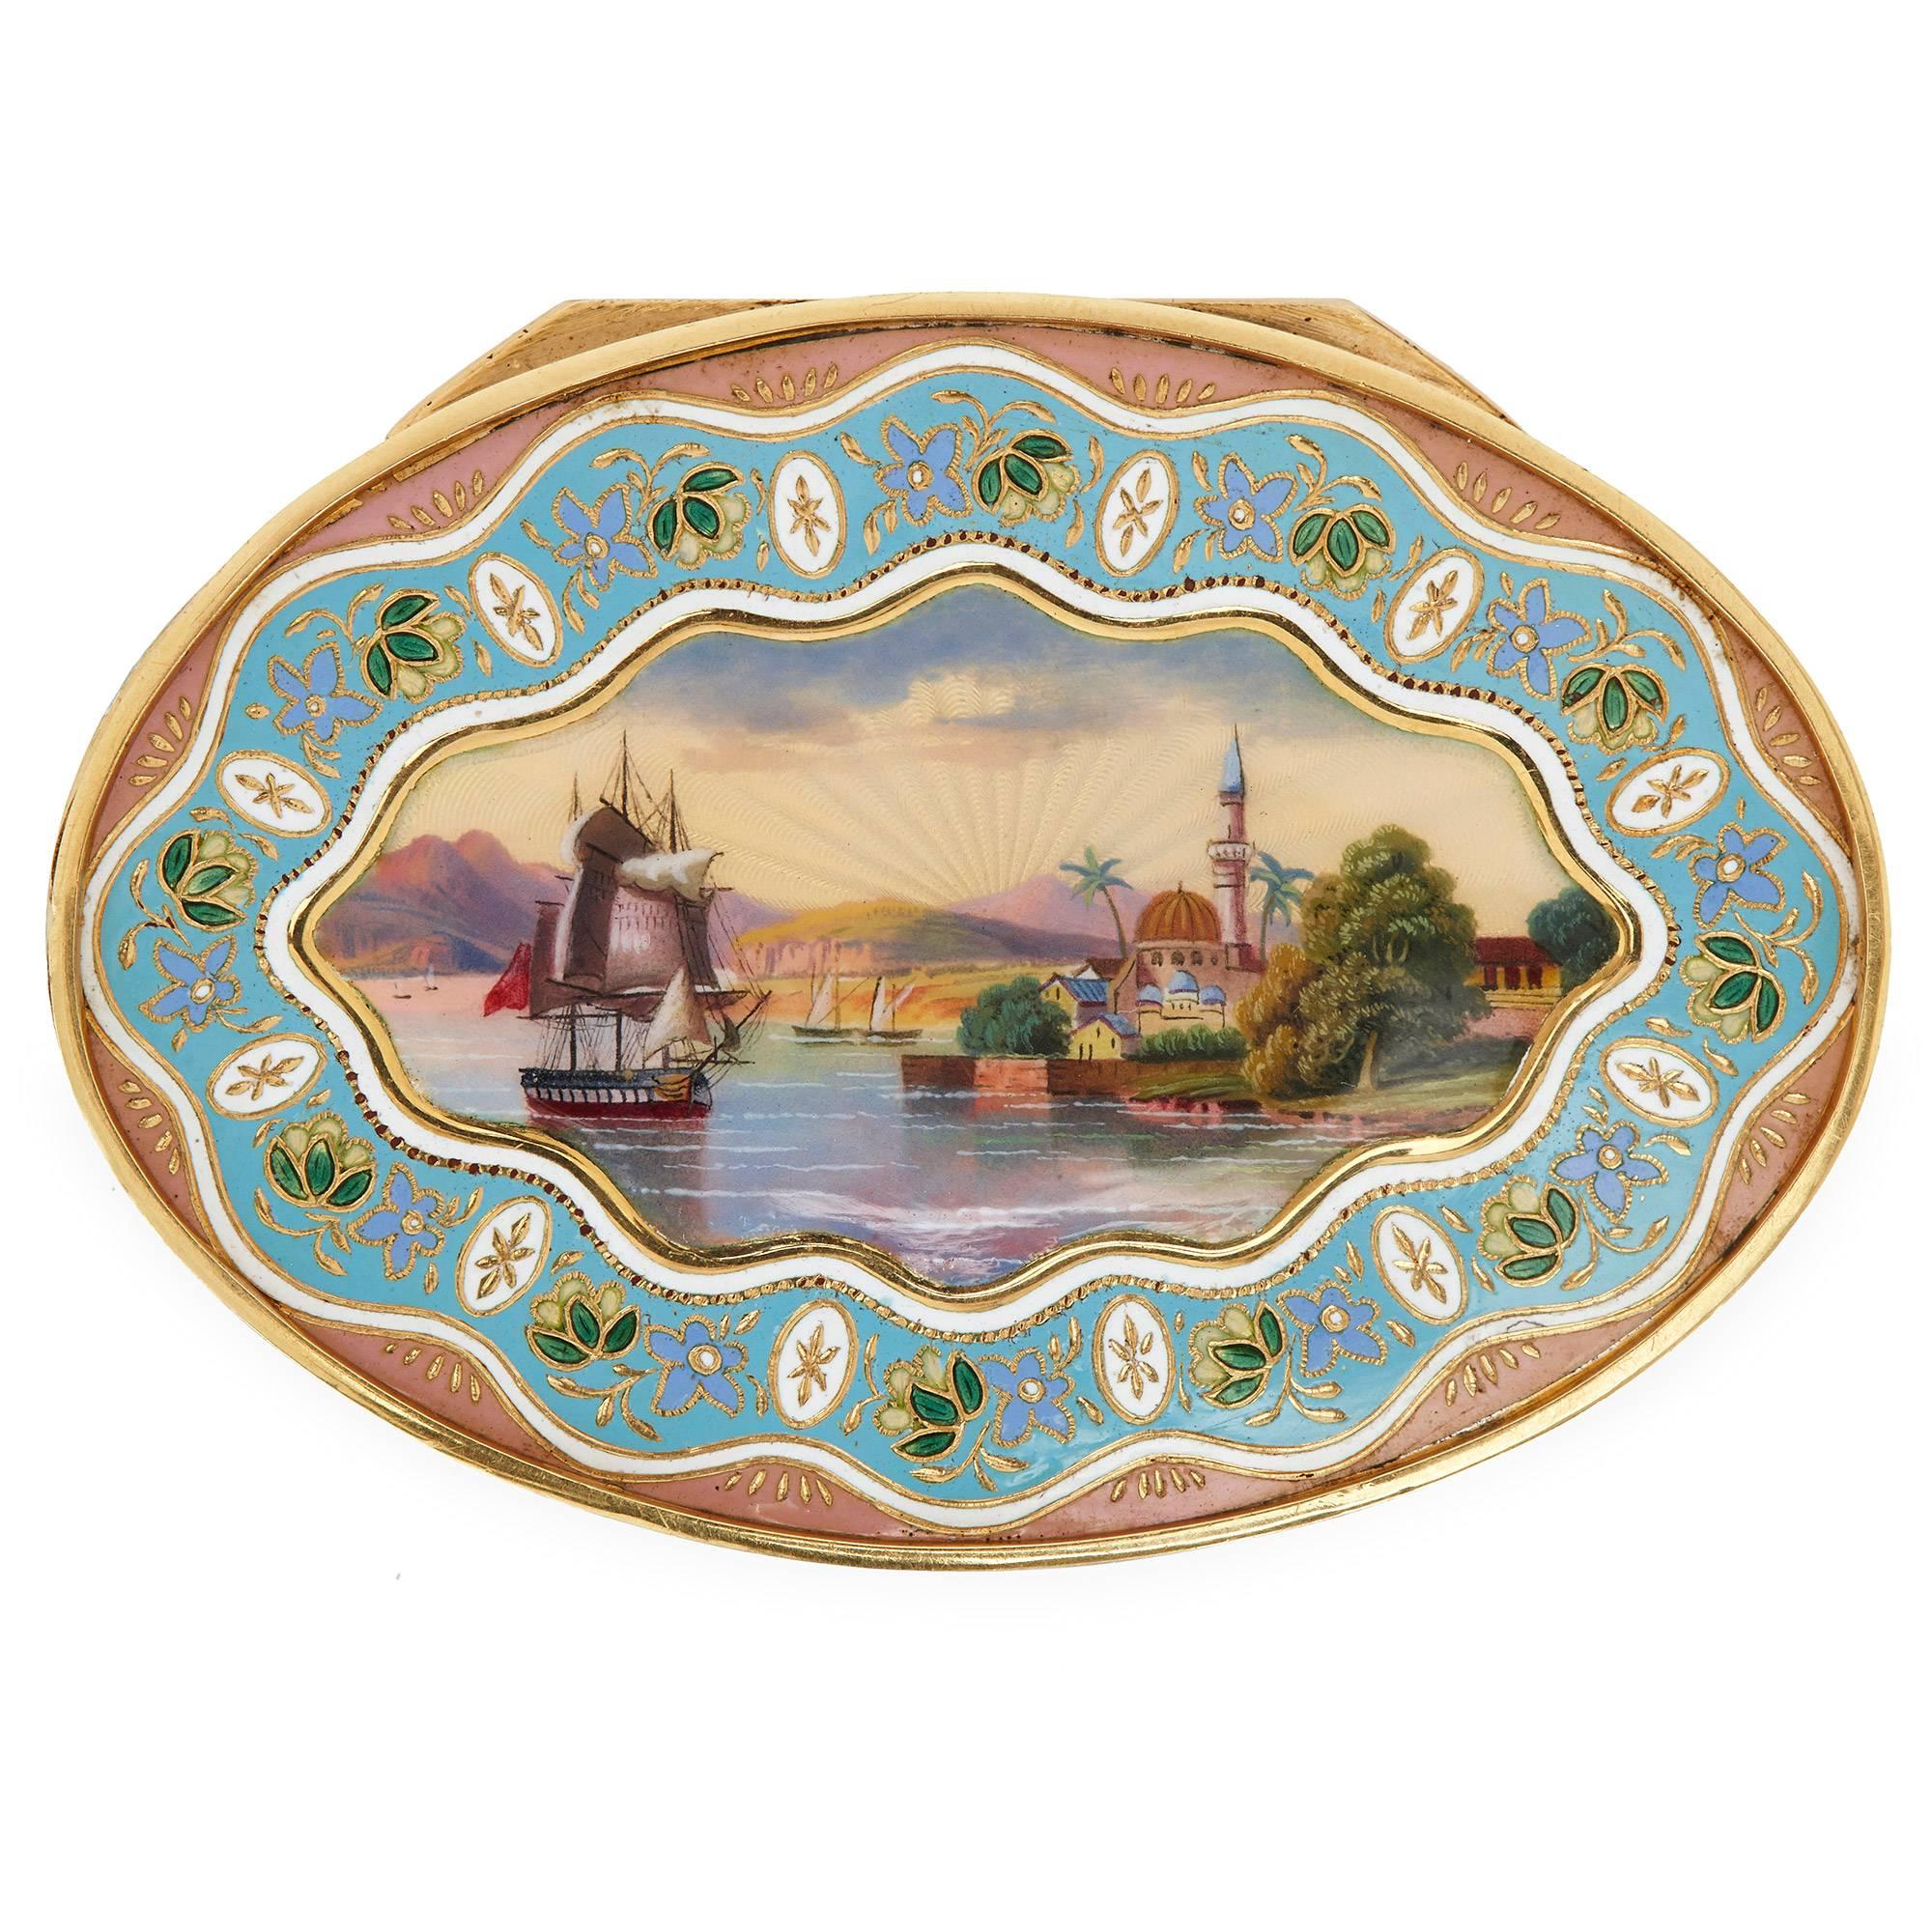 This beautiful, rare snuff box is an exceptional piece of craftsmanship: built from solid gold, the oval-shaped box features detailed enameled decorations all over its exterior. The underside and sides of the box are decorated with finely detailed